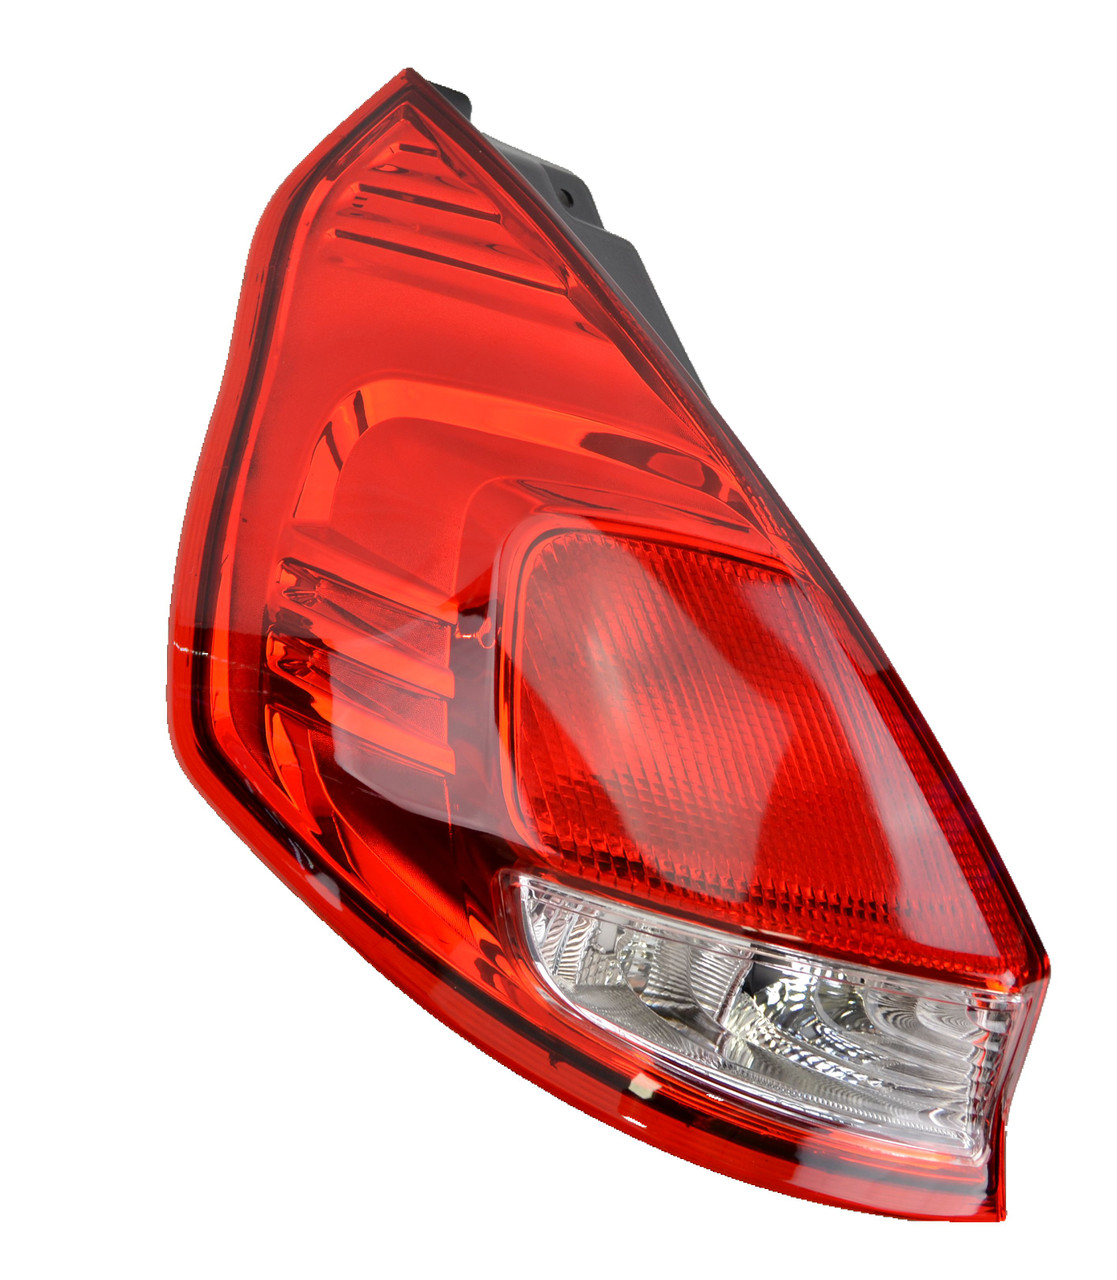 Tail light for Ford Fiesta WZ 08/13-18 New Left Rear Lamp Trend Ambiente 14 15 16 17